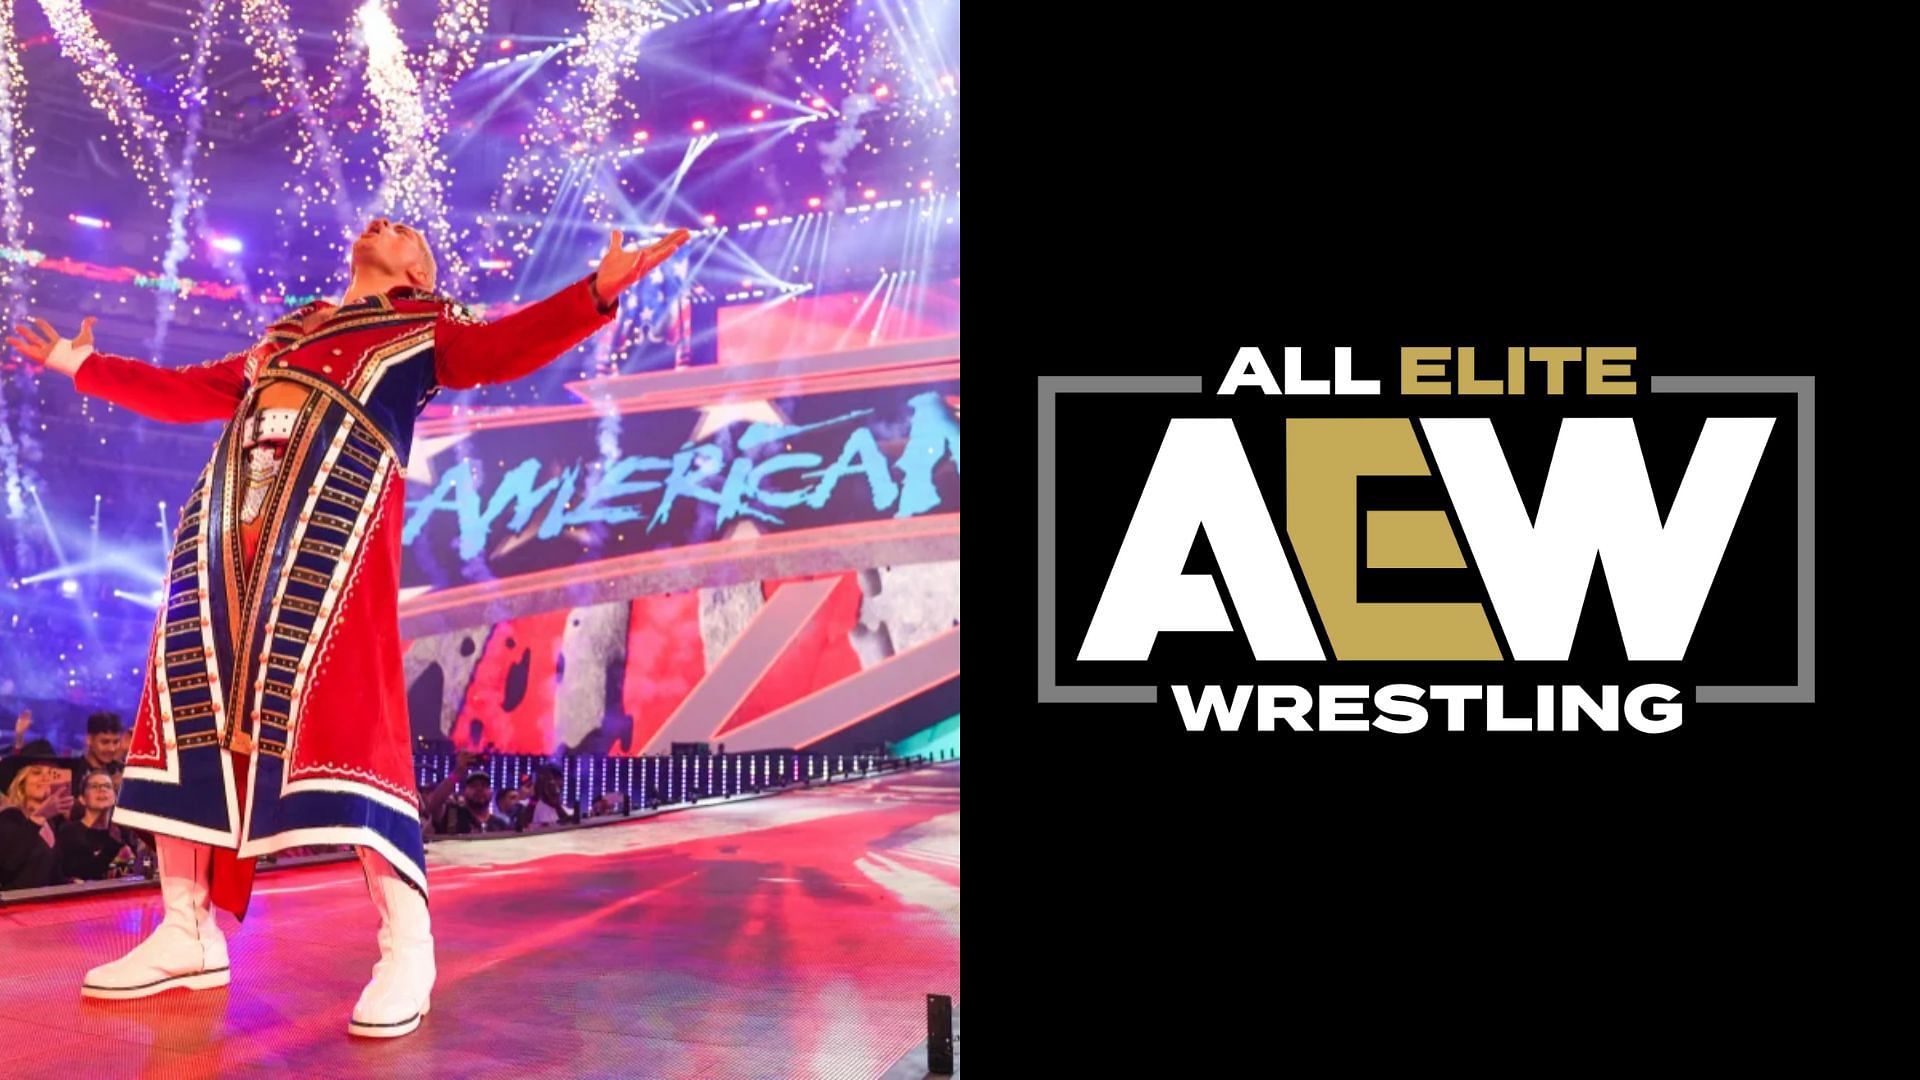 Cody Rhodes is a former AEW superstar now signed with WWE